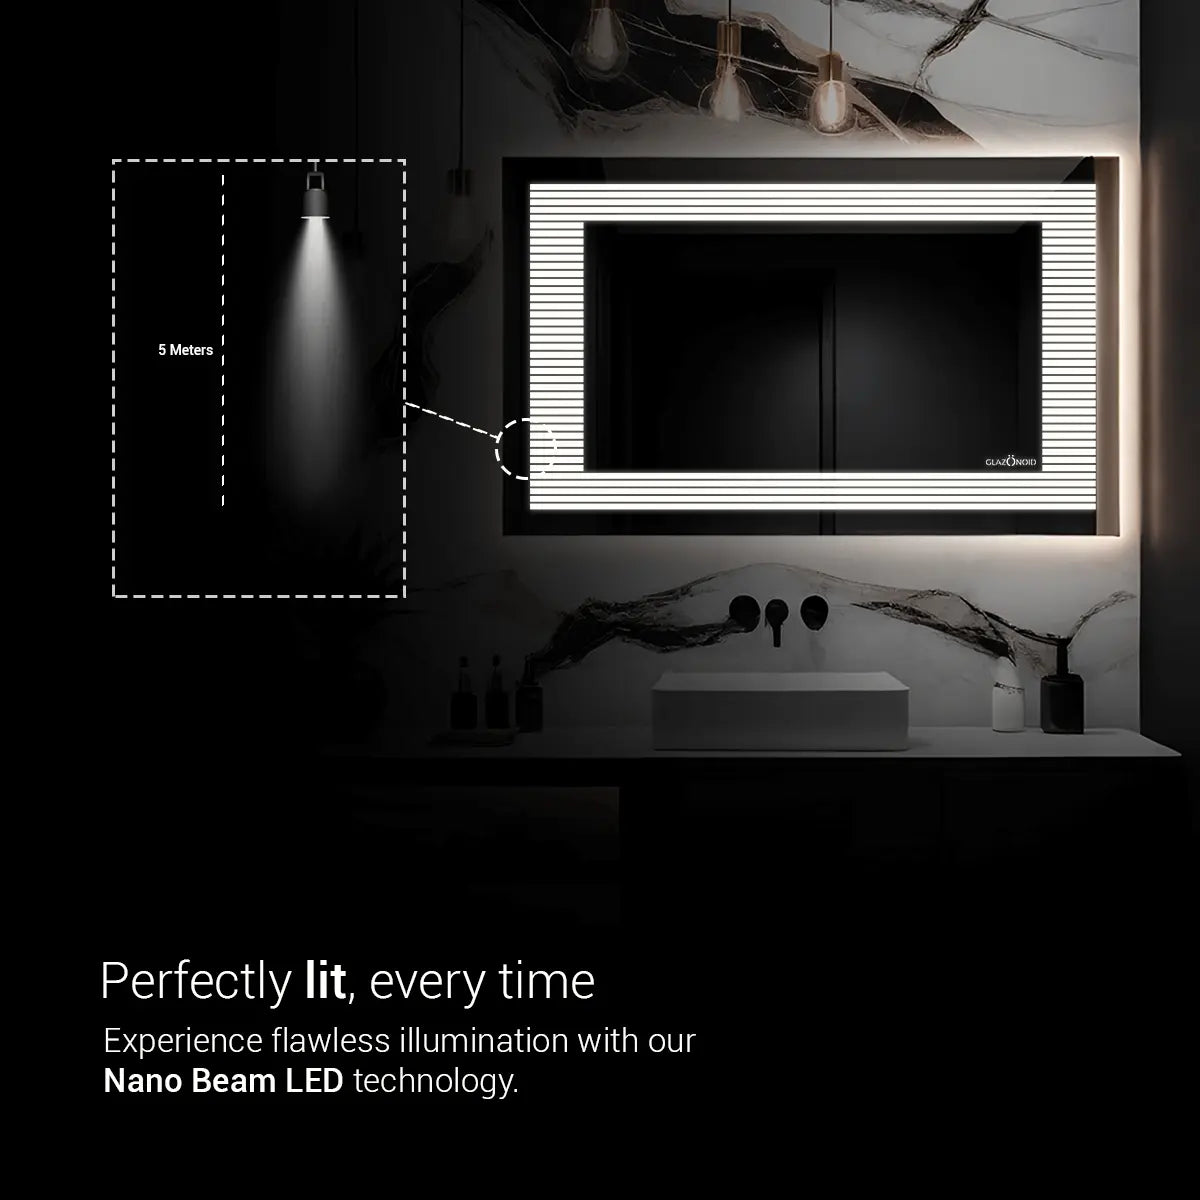 A rectangular bathroom mirror with built-in horizontal LED lights along the sides. The text on the mirror says ‘Glazonoid, 5 Meters, Perfectly lit, every time, Experience flawless illumination with our Nano Beam LED technology’ The mirror is framed and mounted on a bathroom wall with a sink below it.